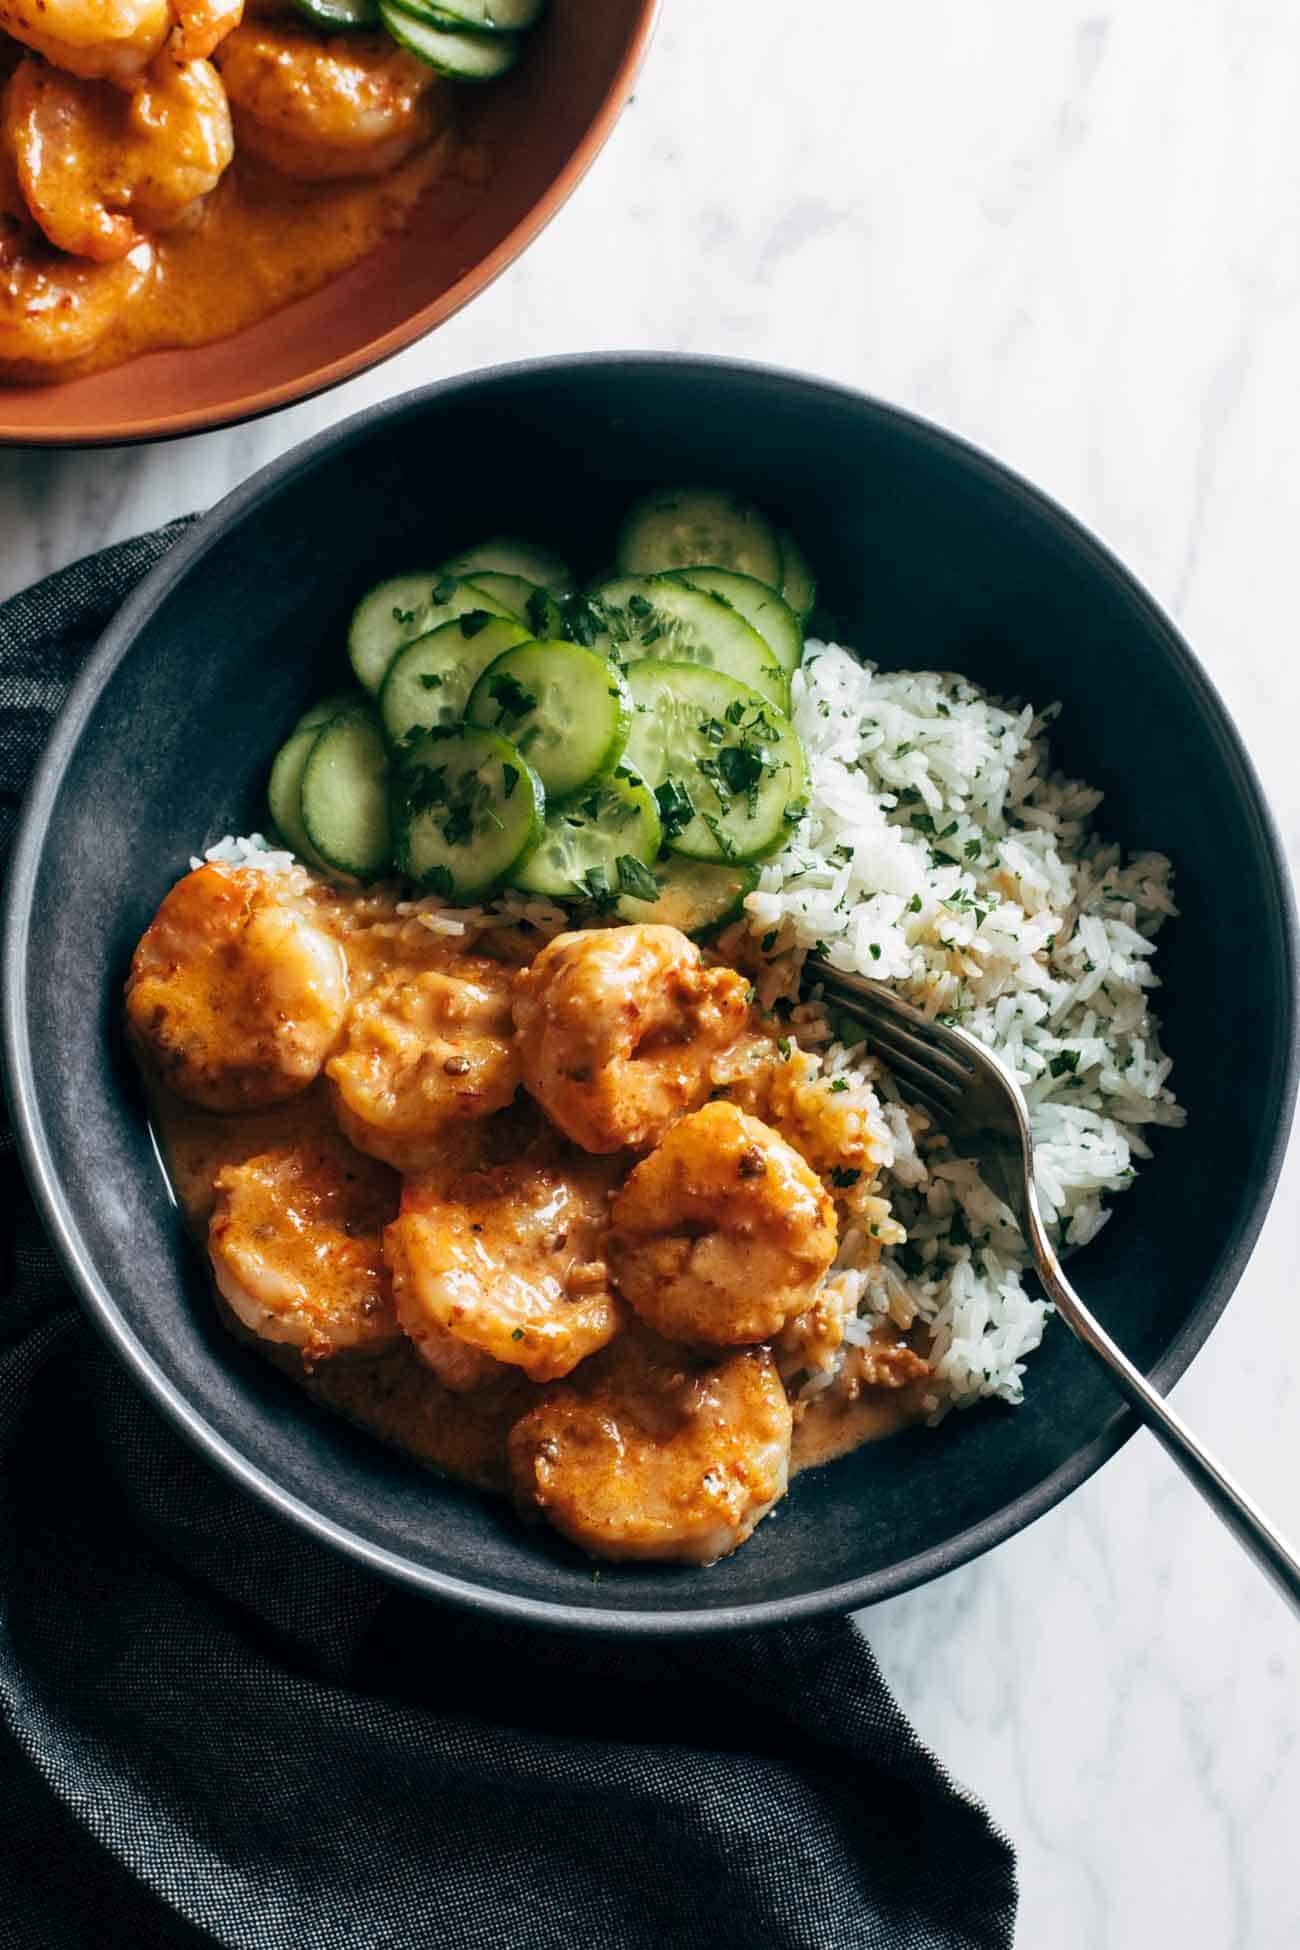 Chipotle orange shrimp in a bowl with rice and cucumbers